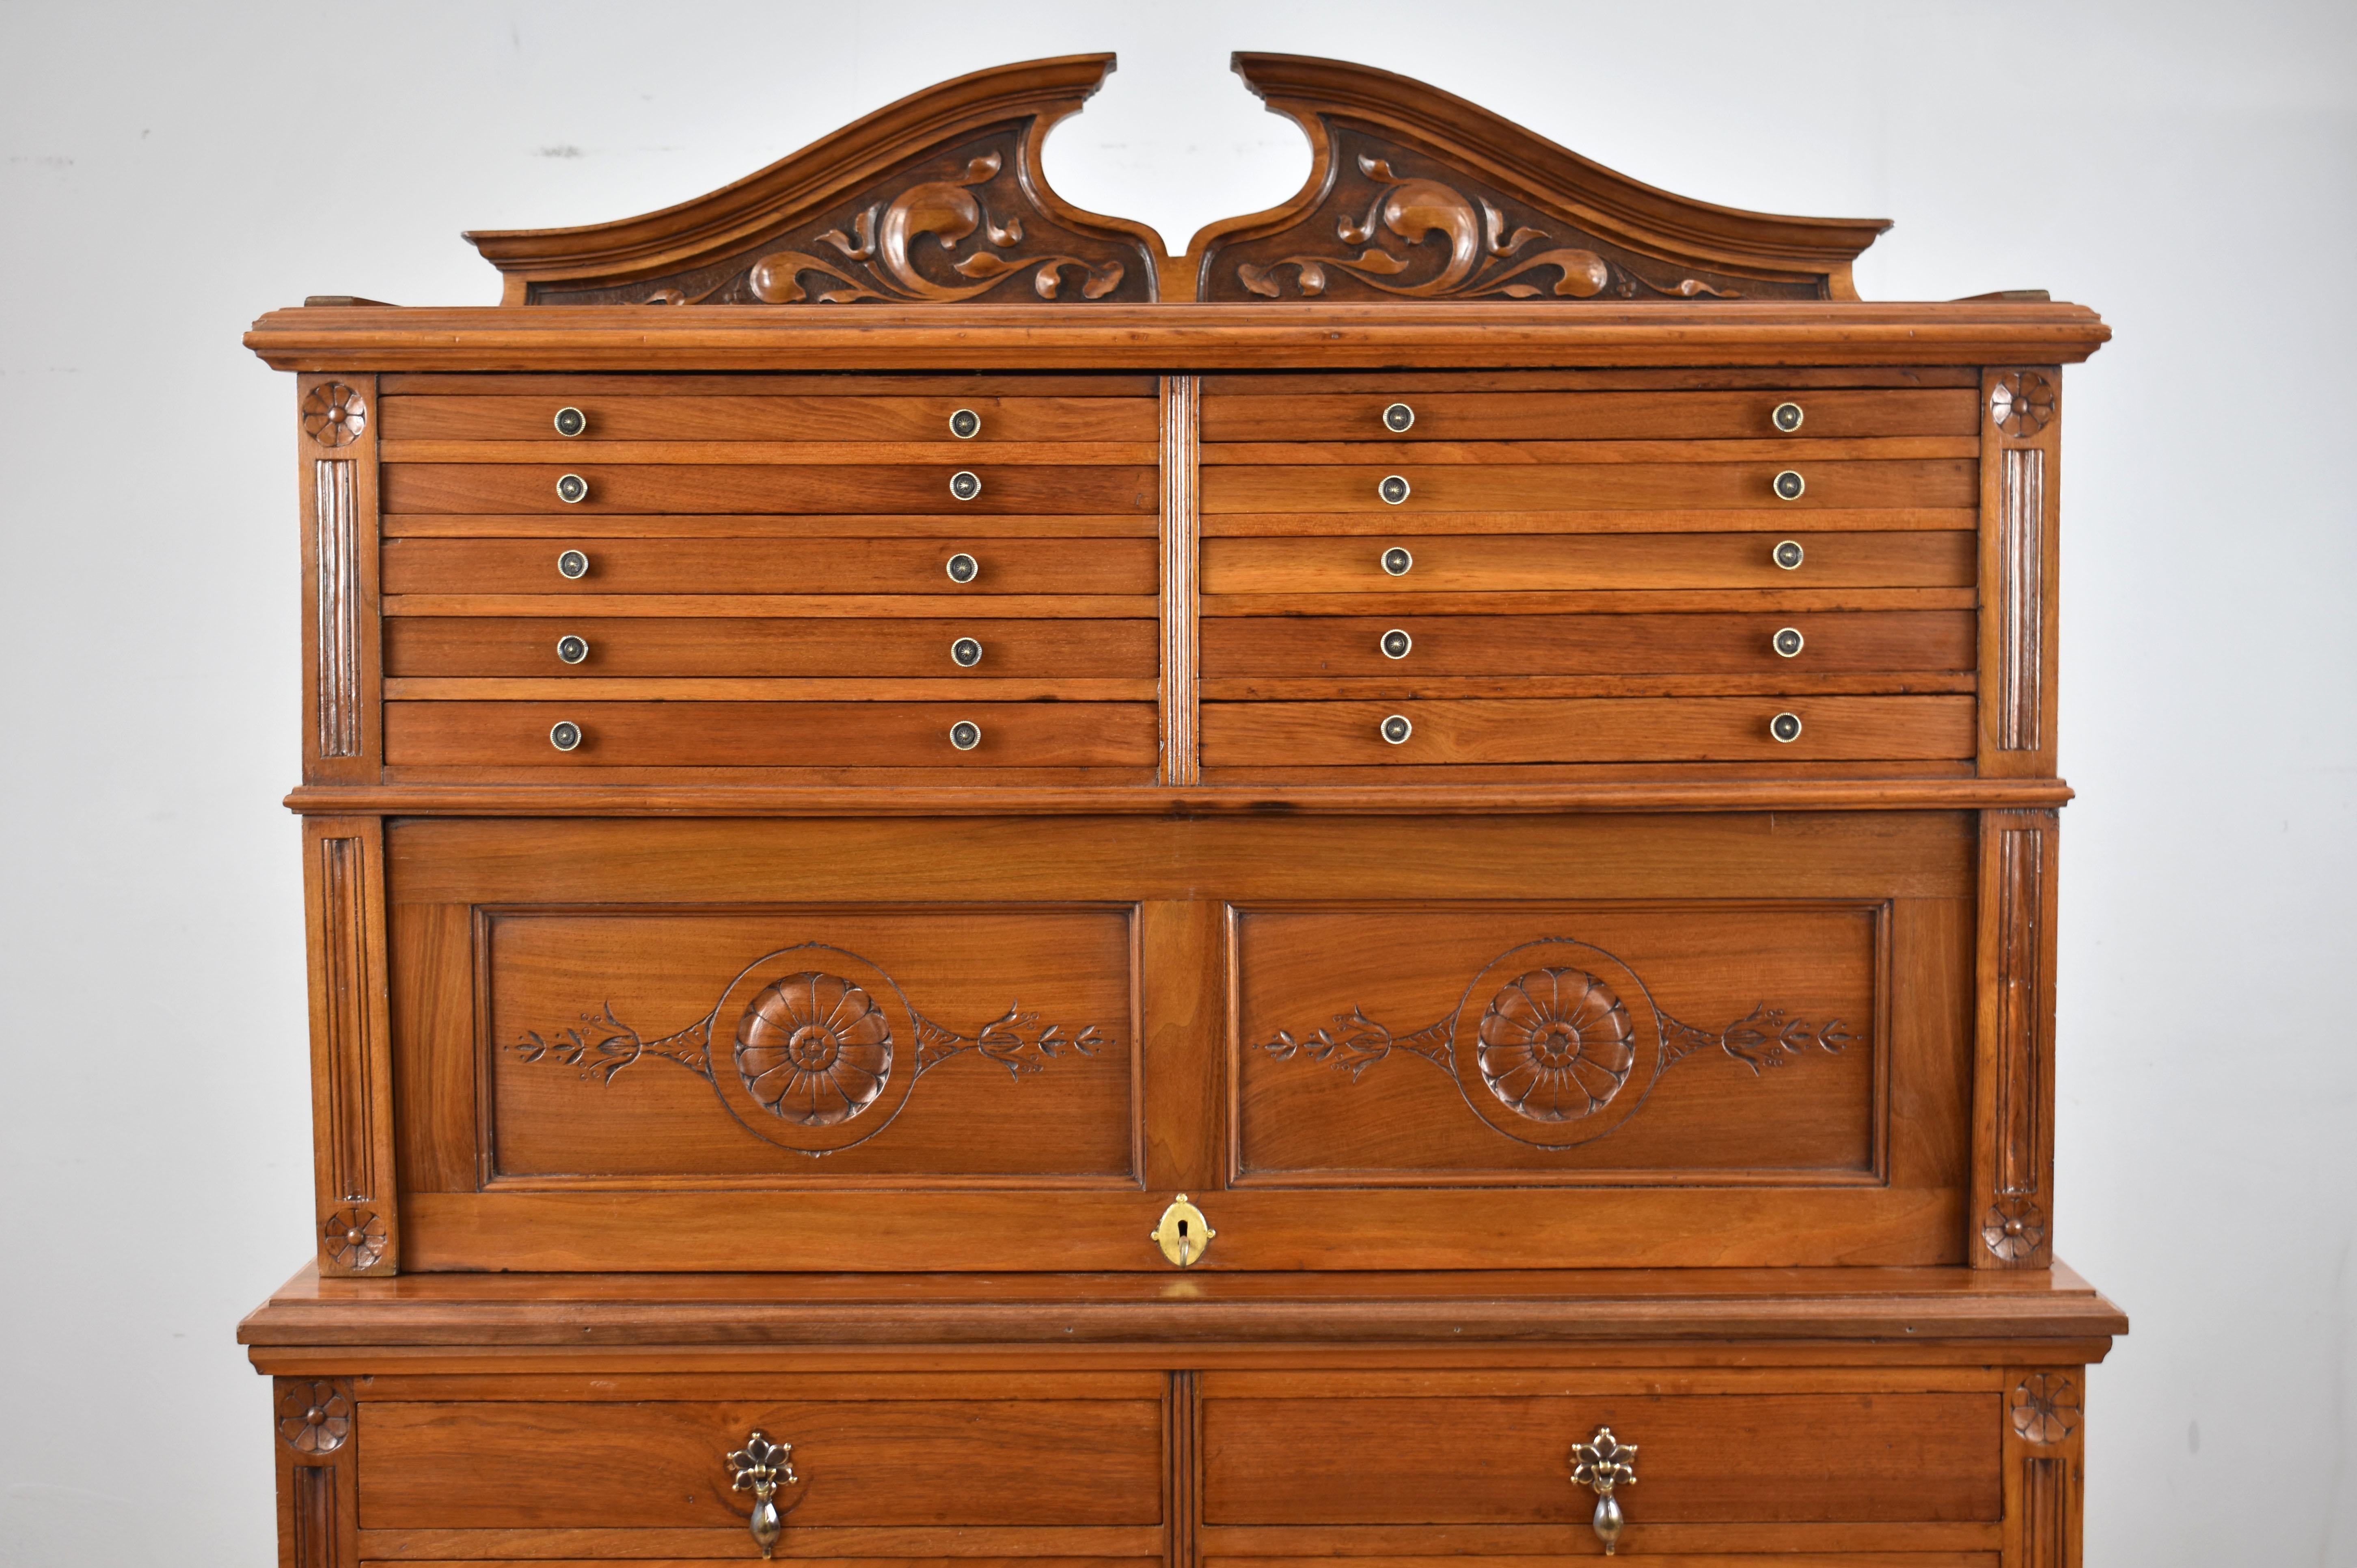 For sale is a Victorian walnut dental cabinet, the super structure fitted with drawers and an open aperture, the base with an arrangement of five graduated drawers above cupboards. The cabinet remains in very good condition, showing minor signs of